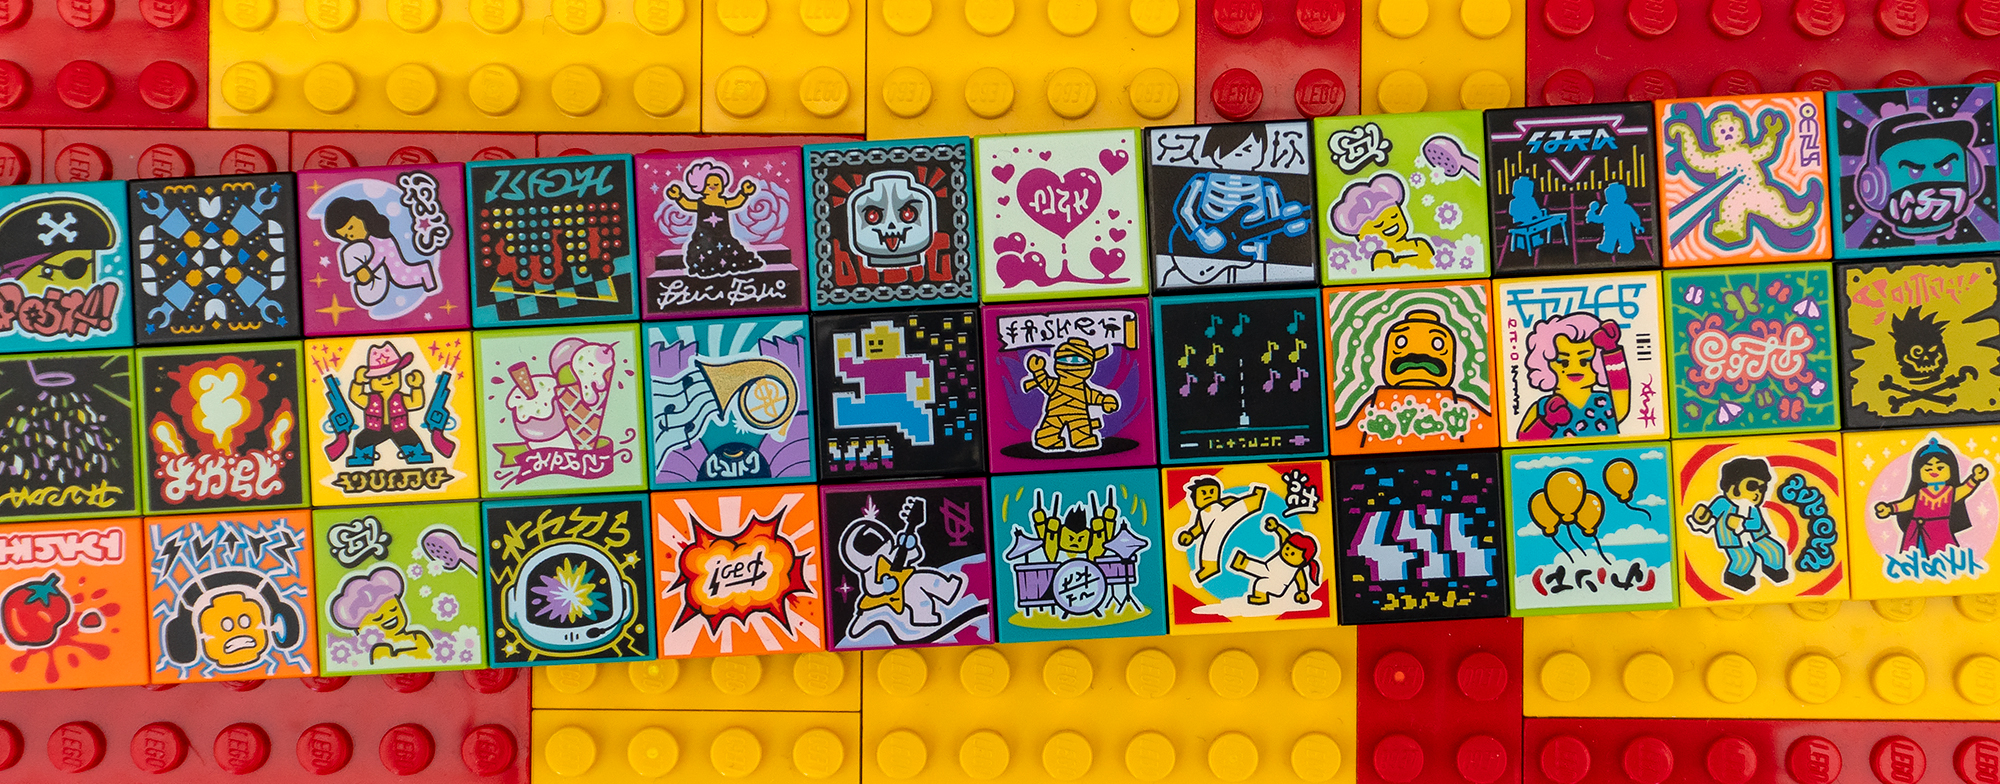 It's not immediately obvious what each BeatBits tile does, but it doesn't take long to learn what music video effect they trigger. (Photo: Andrew Liszewski/Gizmodo)